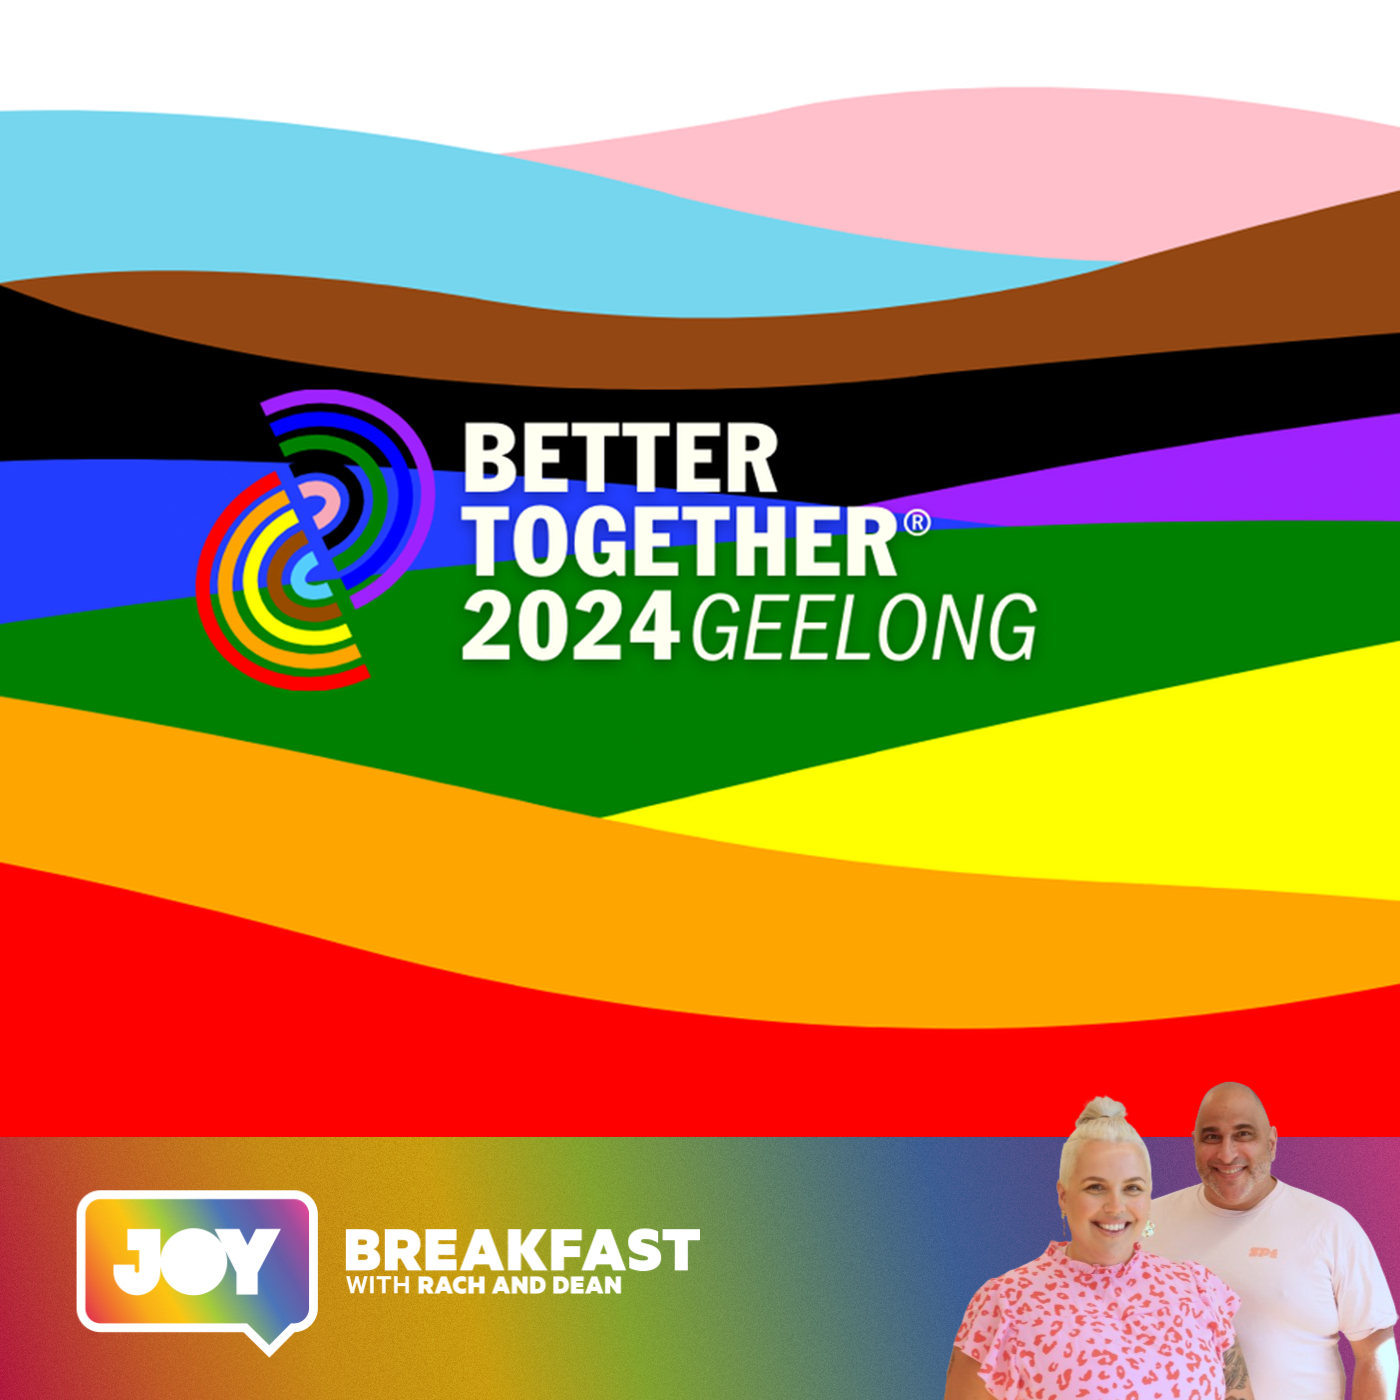 How was Better Together 2024?